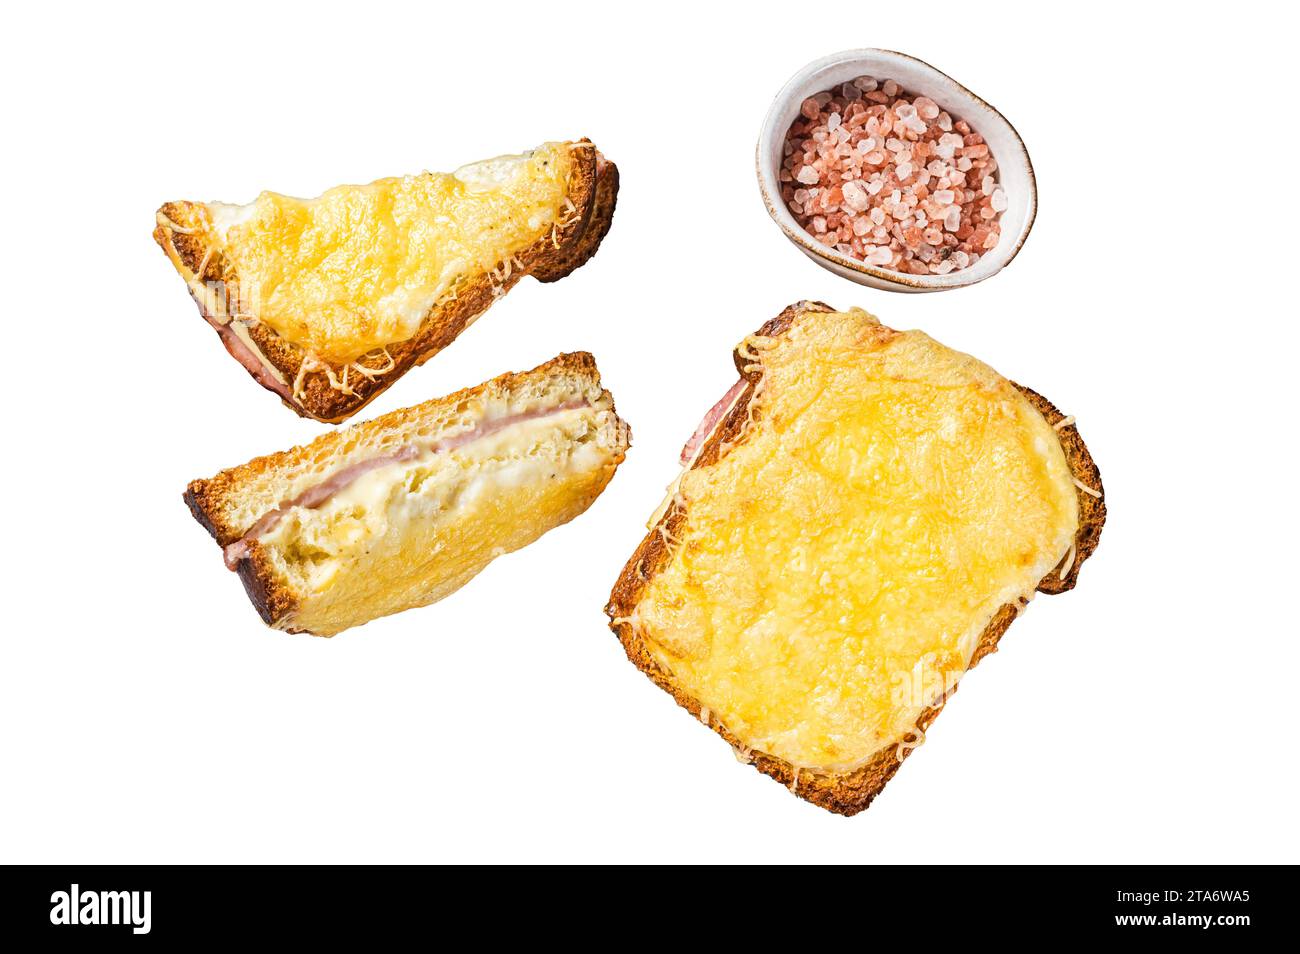 French Croque Monsieur sandwich with Cheese, Ham, Gruyere and Bechamel Sauce. Isolated, white background Stock Photo